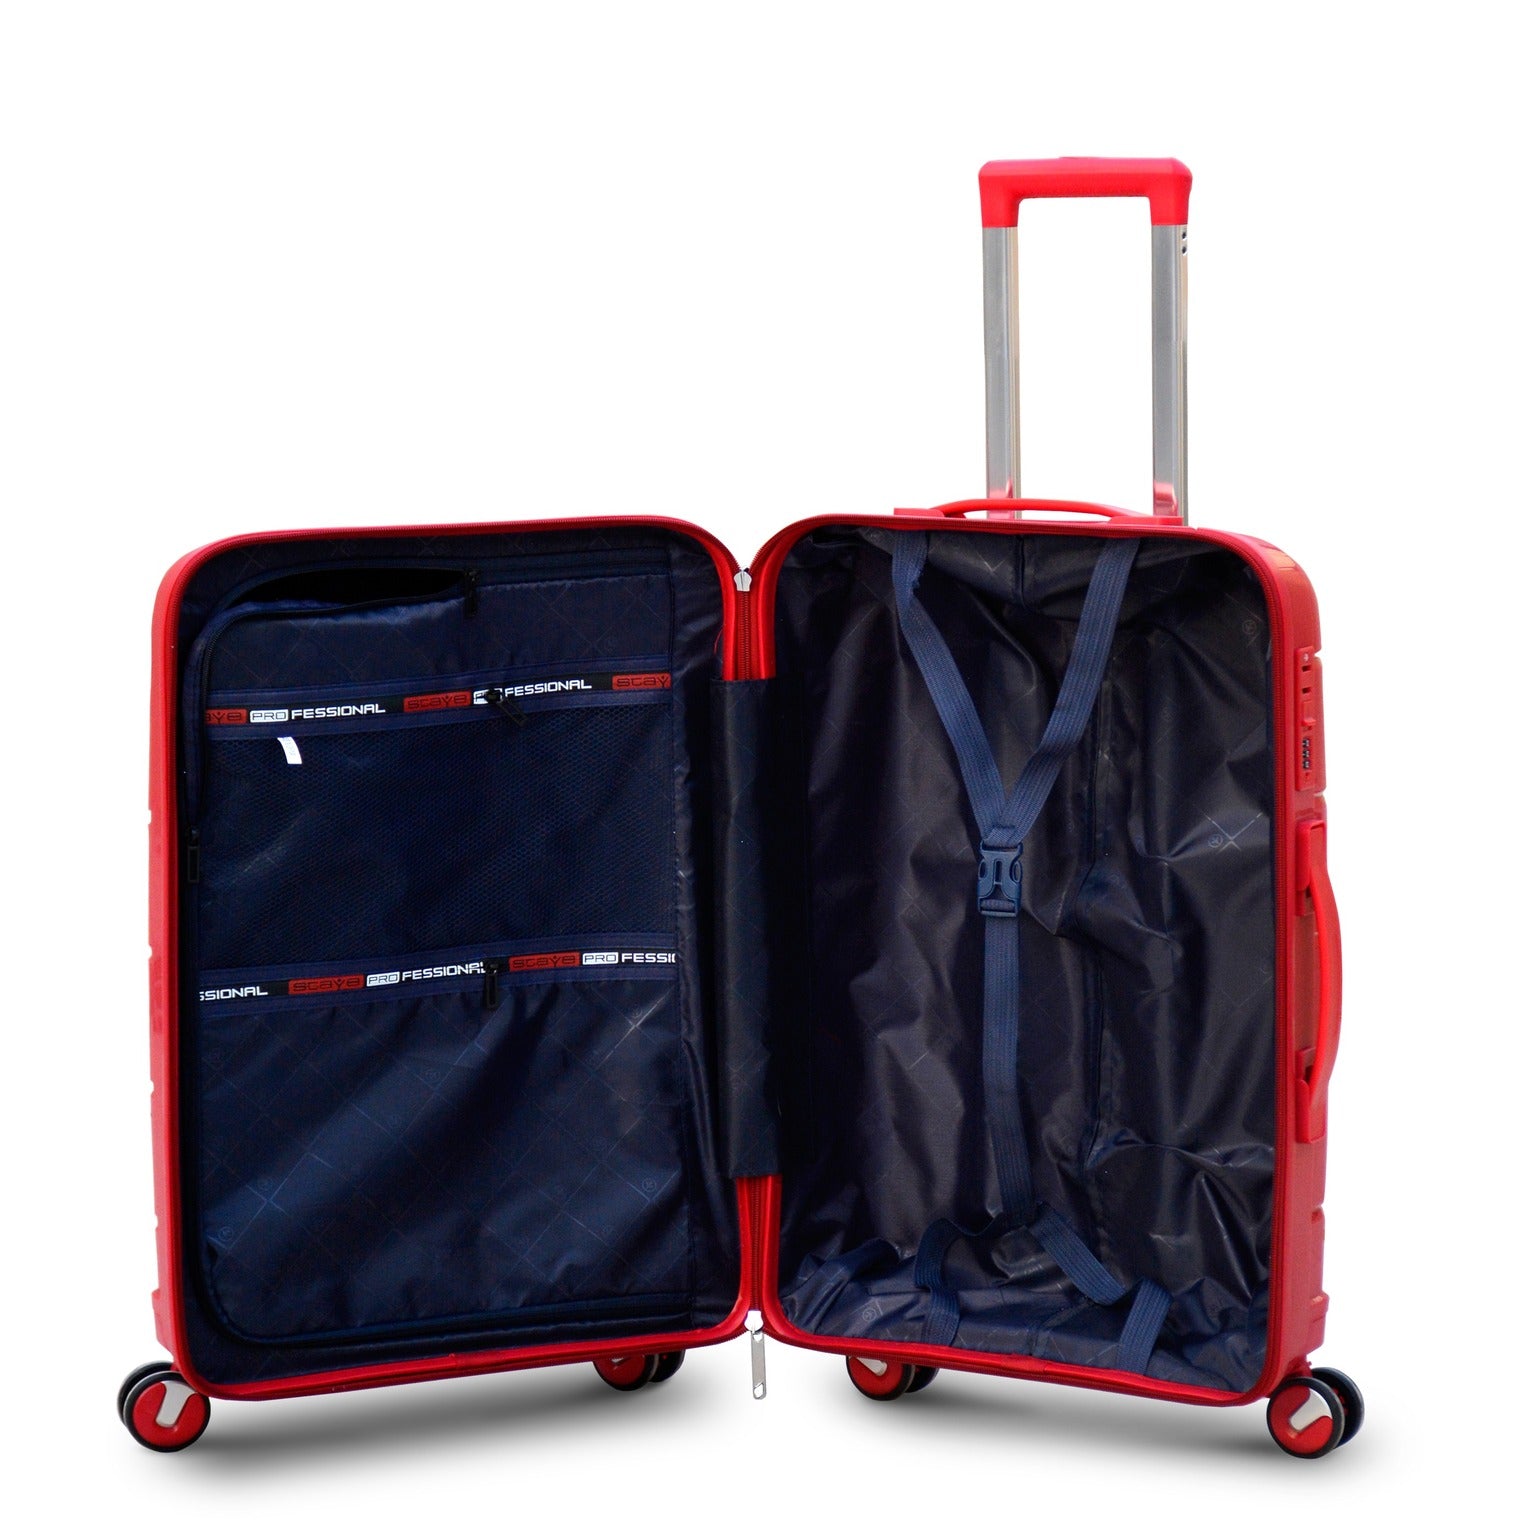 4 Piece Full Set 7" 20" 24" 28 Inches Red Colour Ceramic Smooth PP Luggage Hard Case Trolley Bag with Double Spinner Wheel